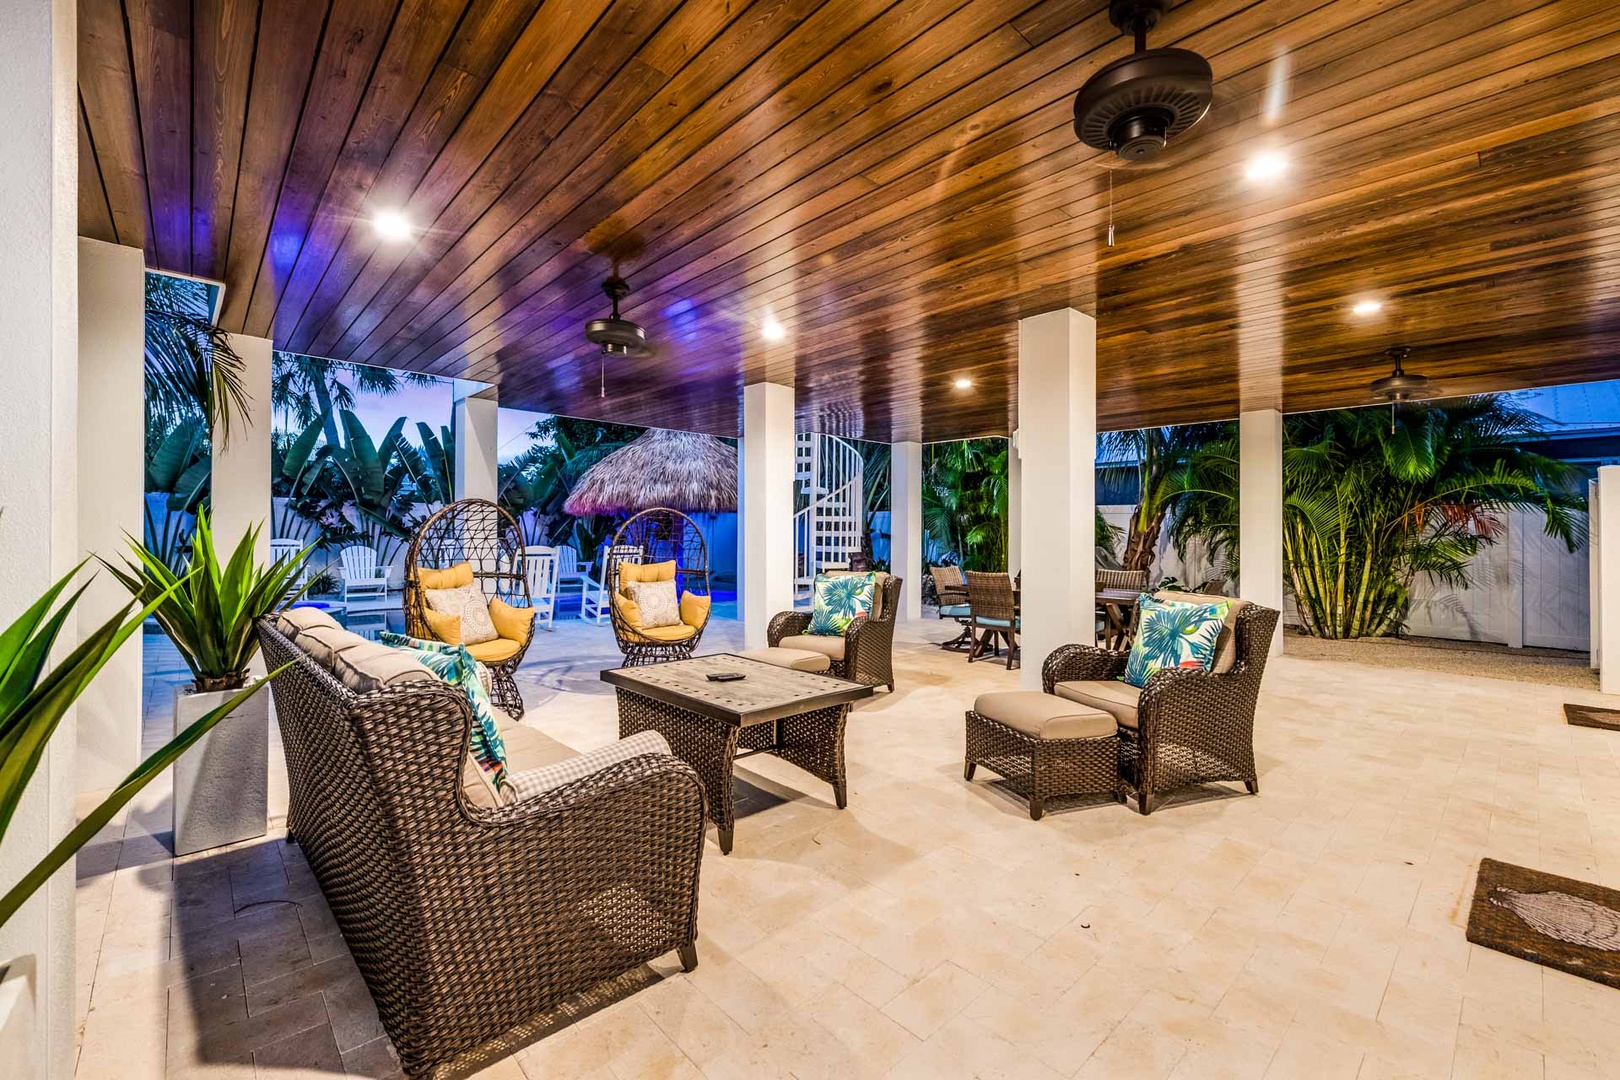 Covered Patio Seating Area